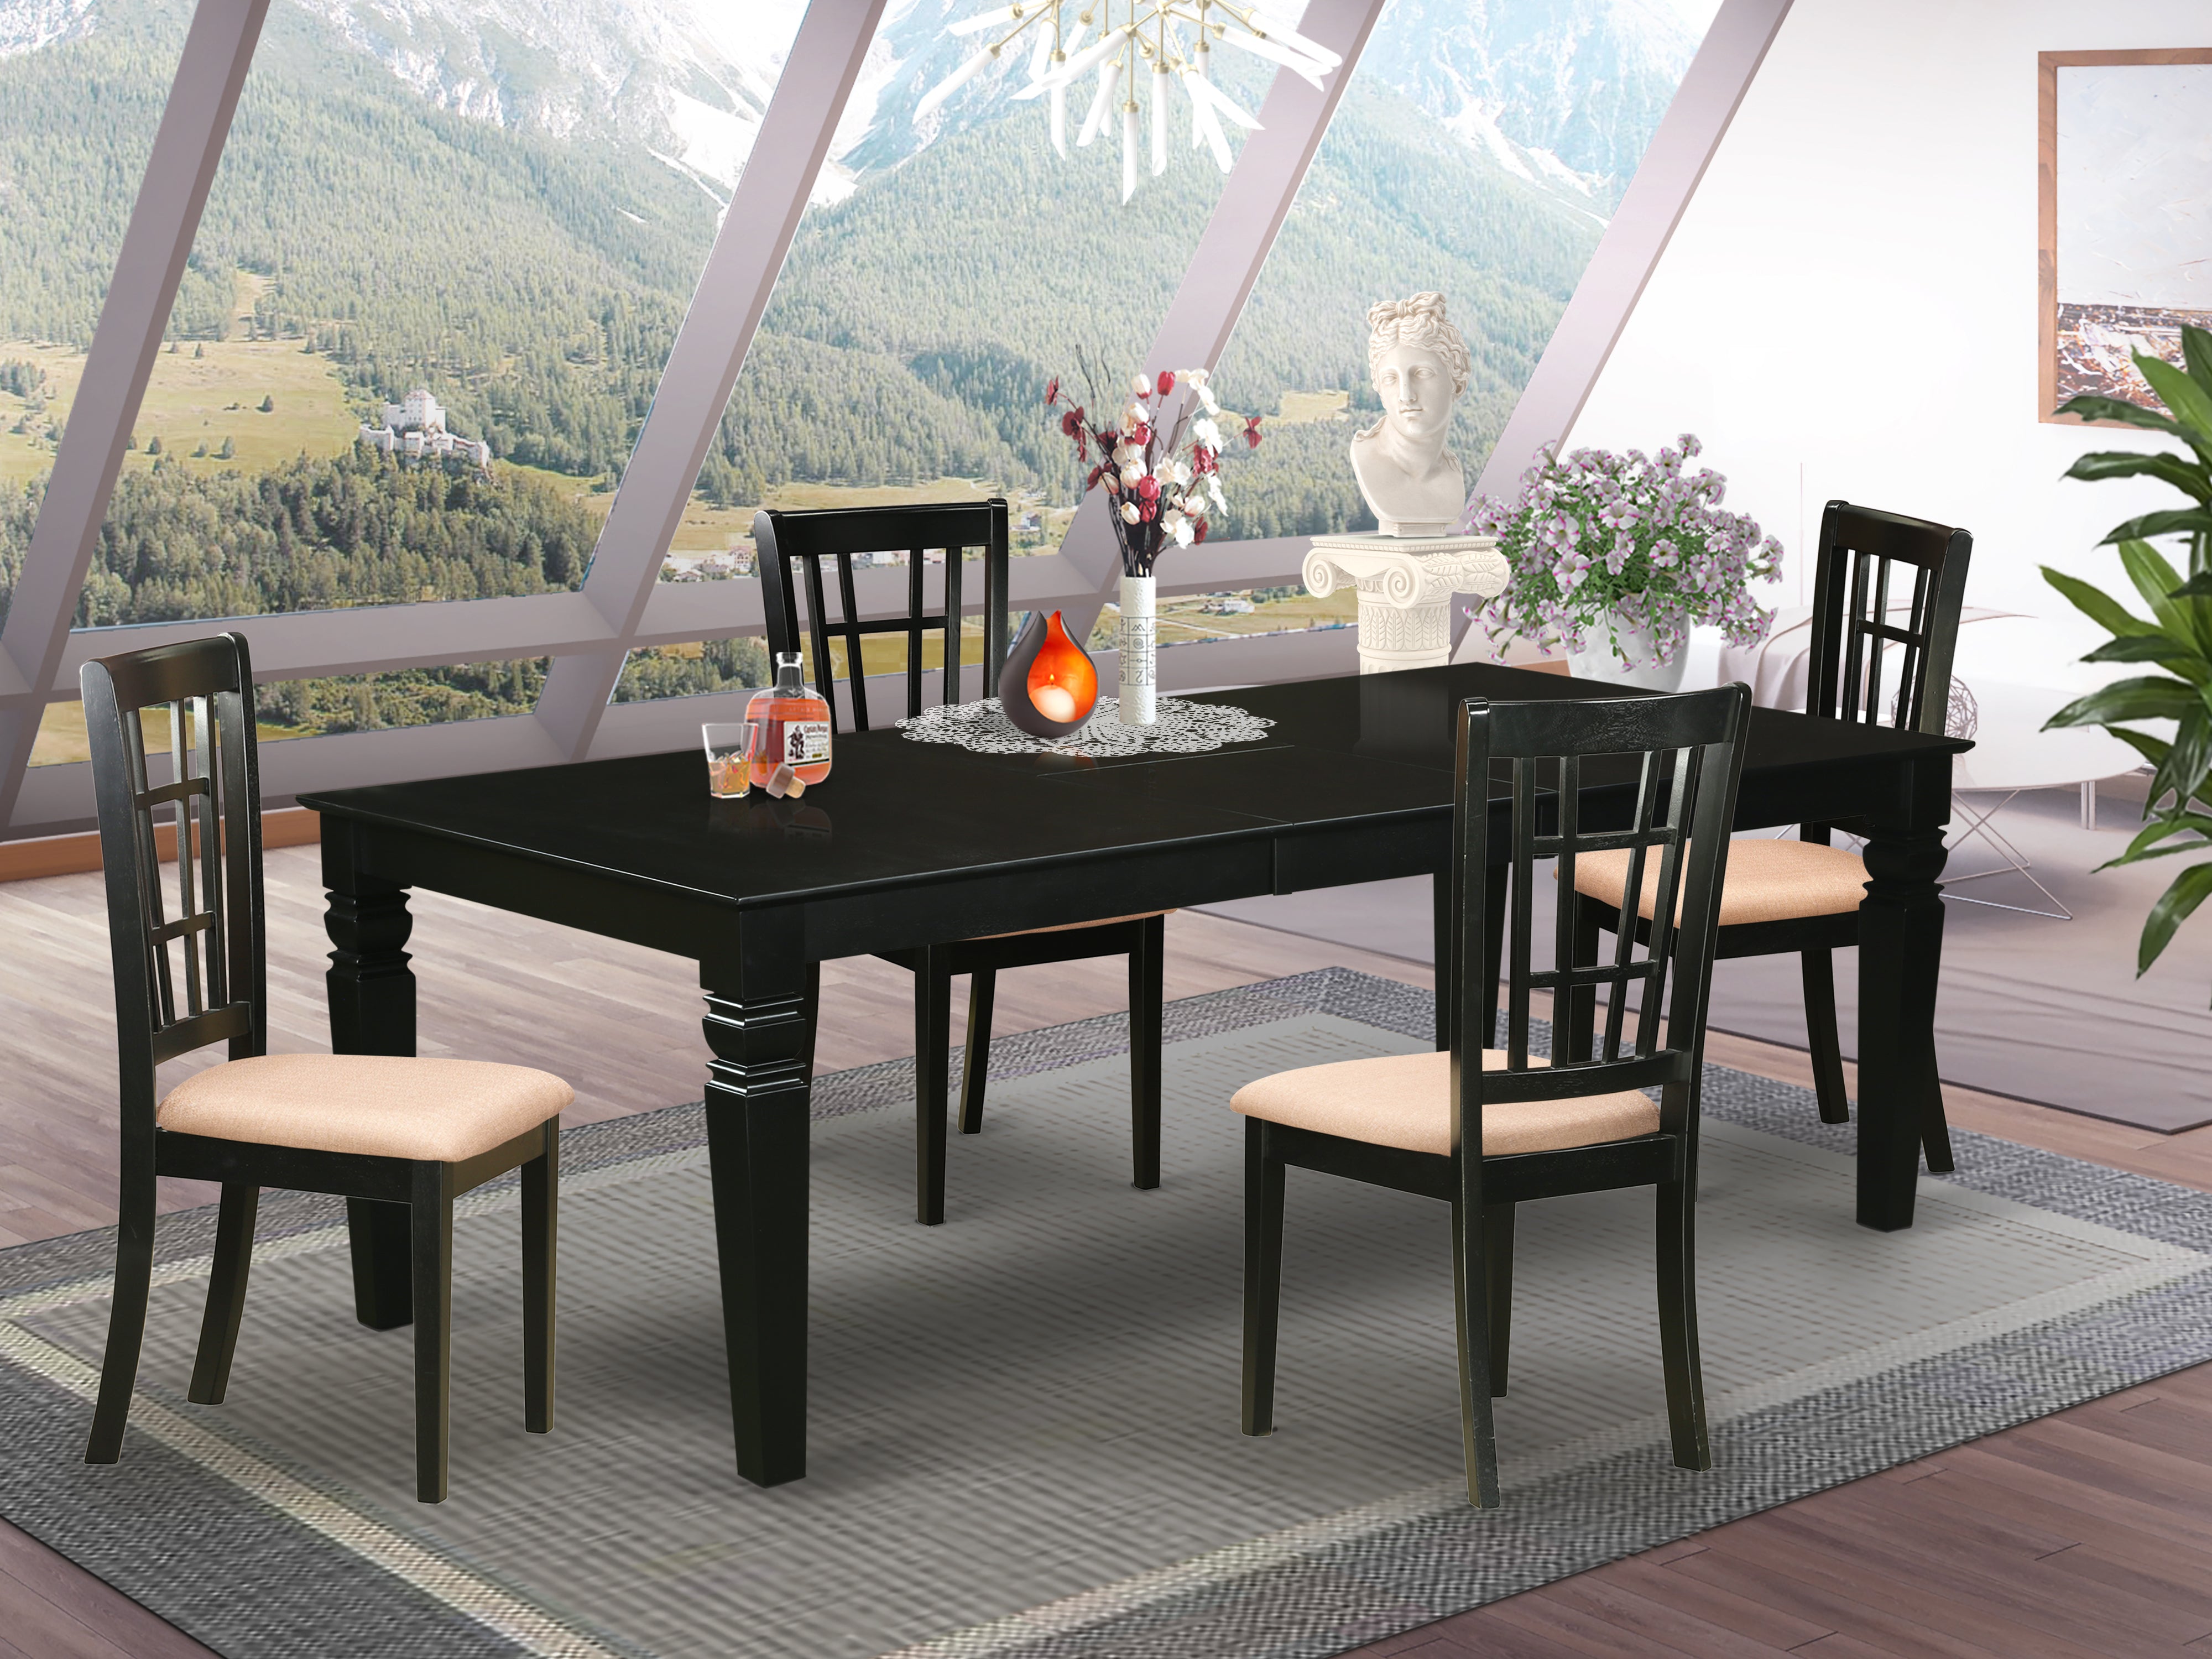 LGNI5-BLK-C 5 Pc Kitchen table set with a Dining Table and 4 Kitchen Chairs in Black